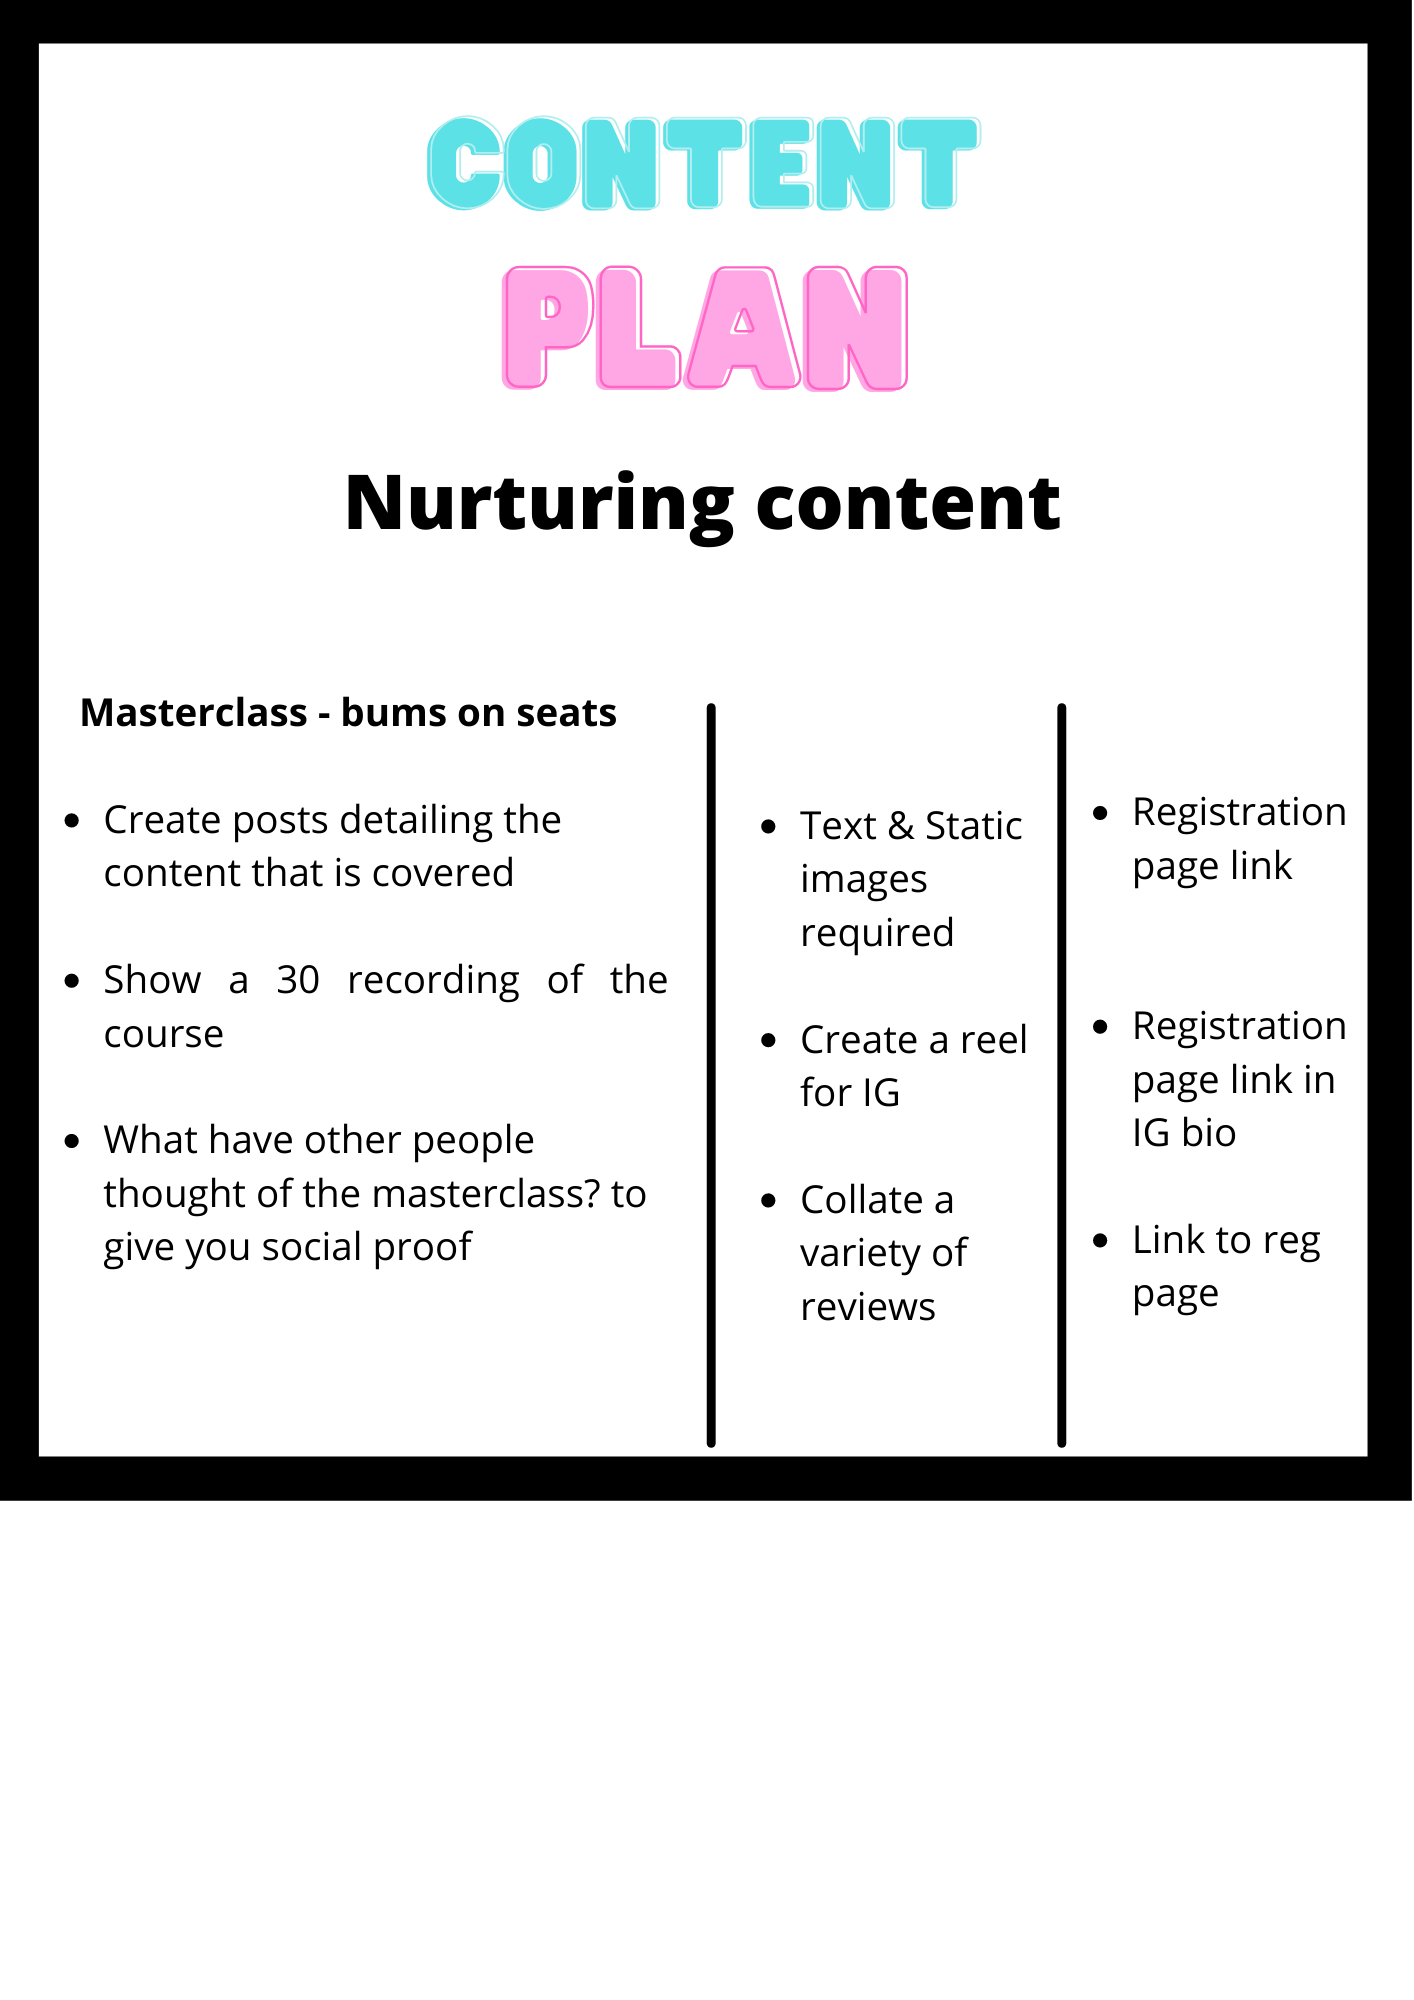 An example of a nurturing content plan